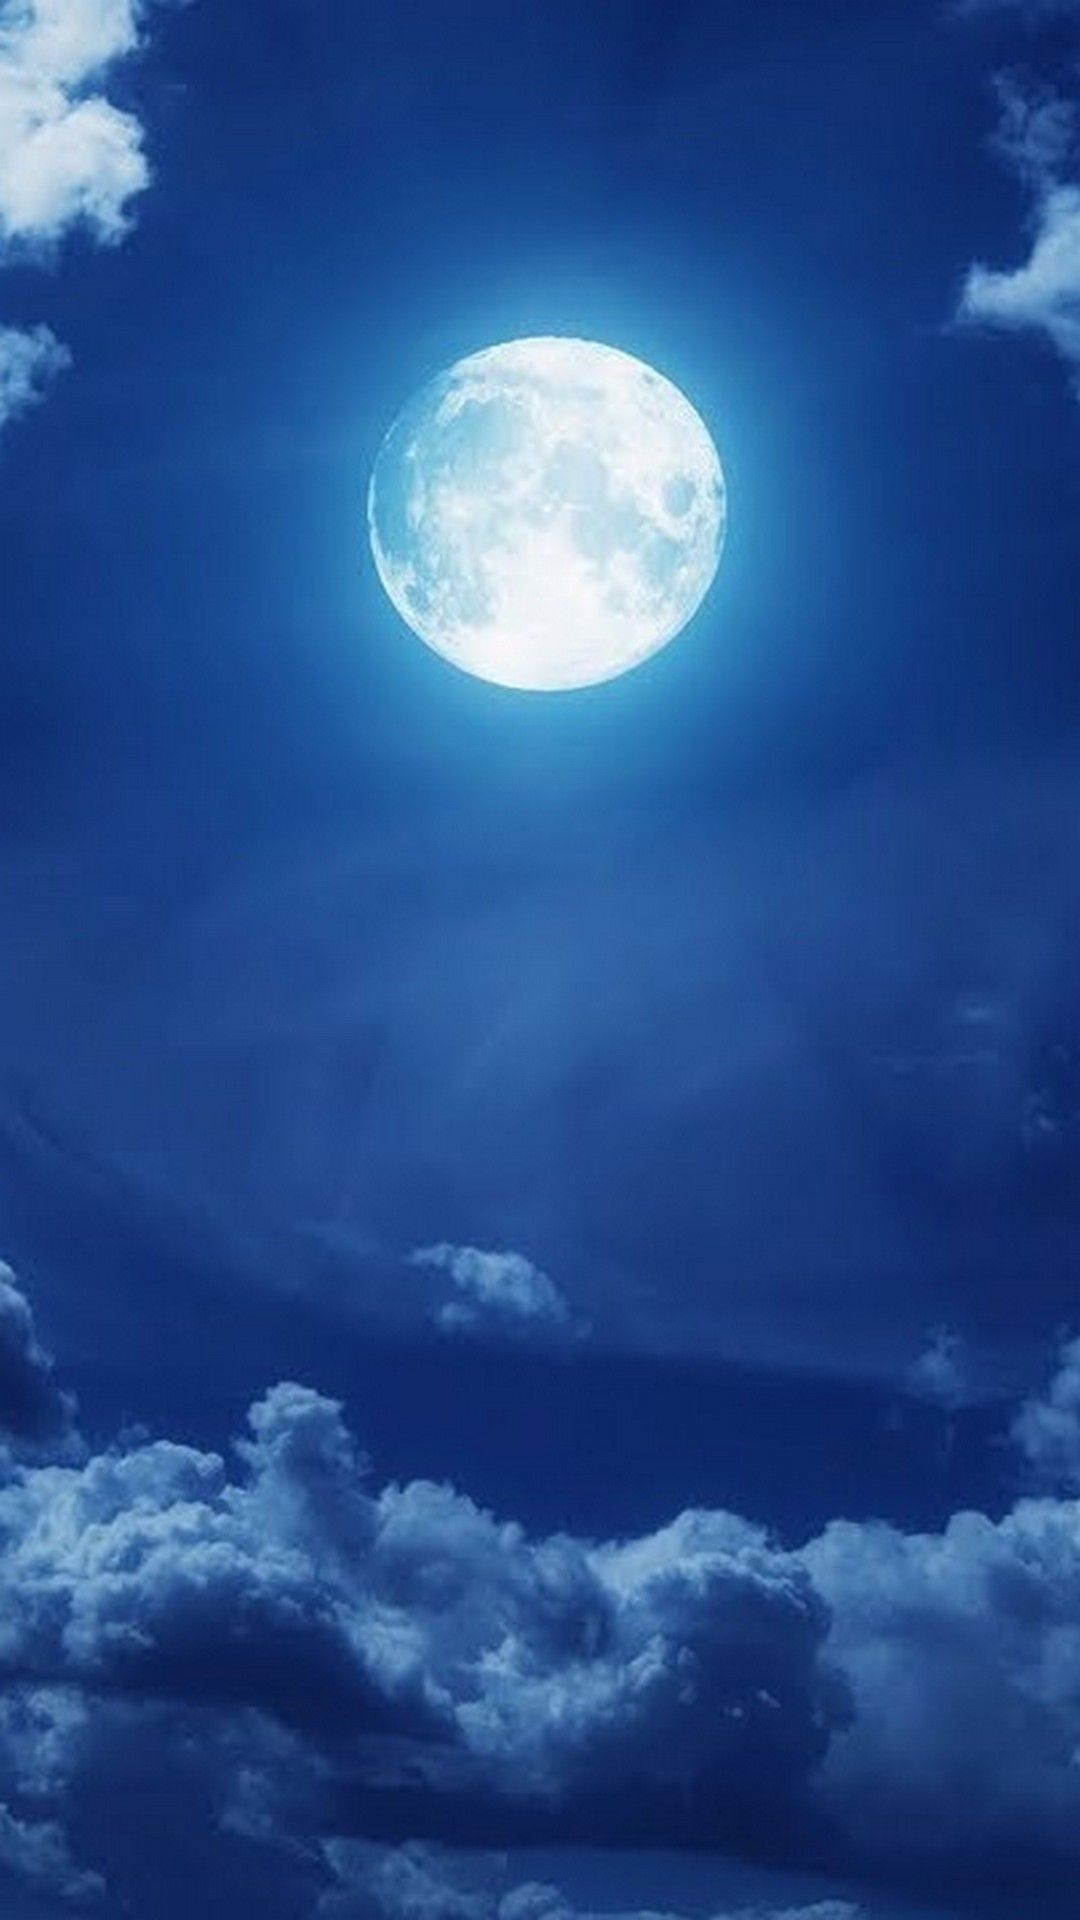 Full Moon Mobile Wallpapers HD Full Moon Backgrounds Free Images Download